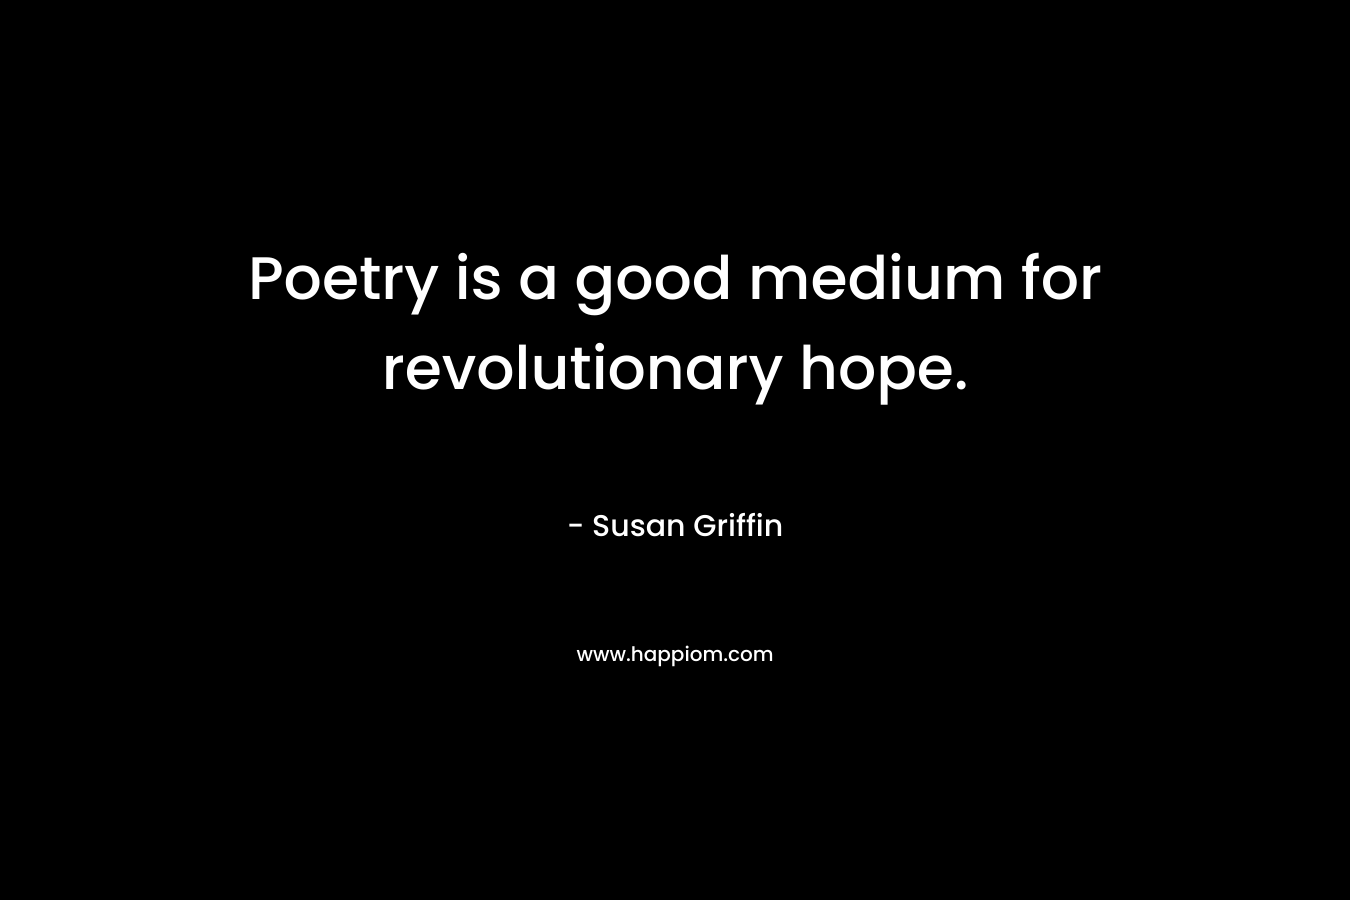 Poetry is a good medium for revolutionary hope.